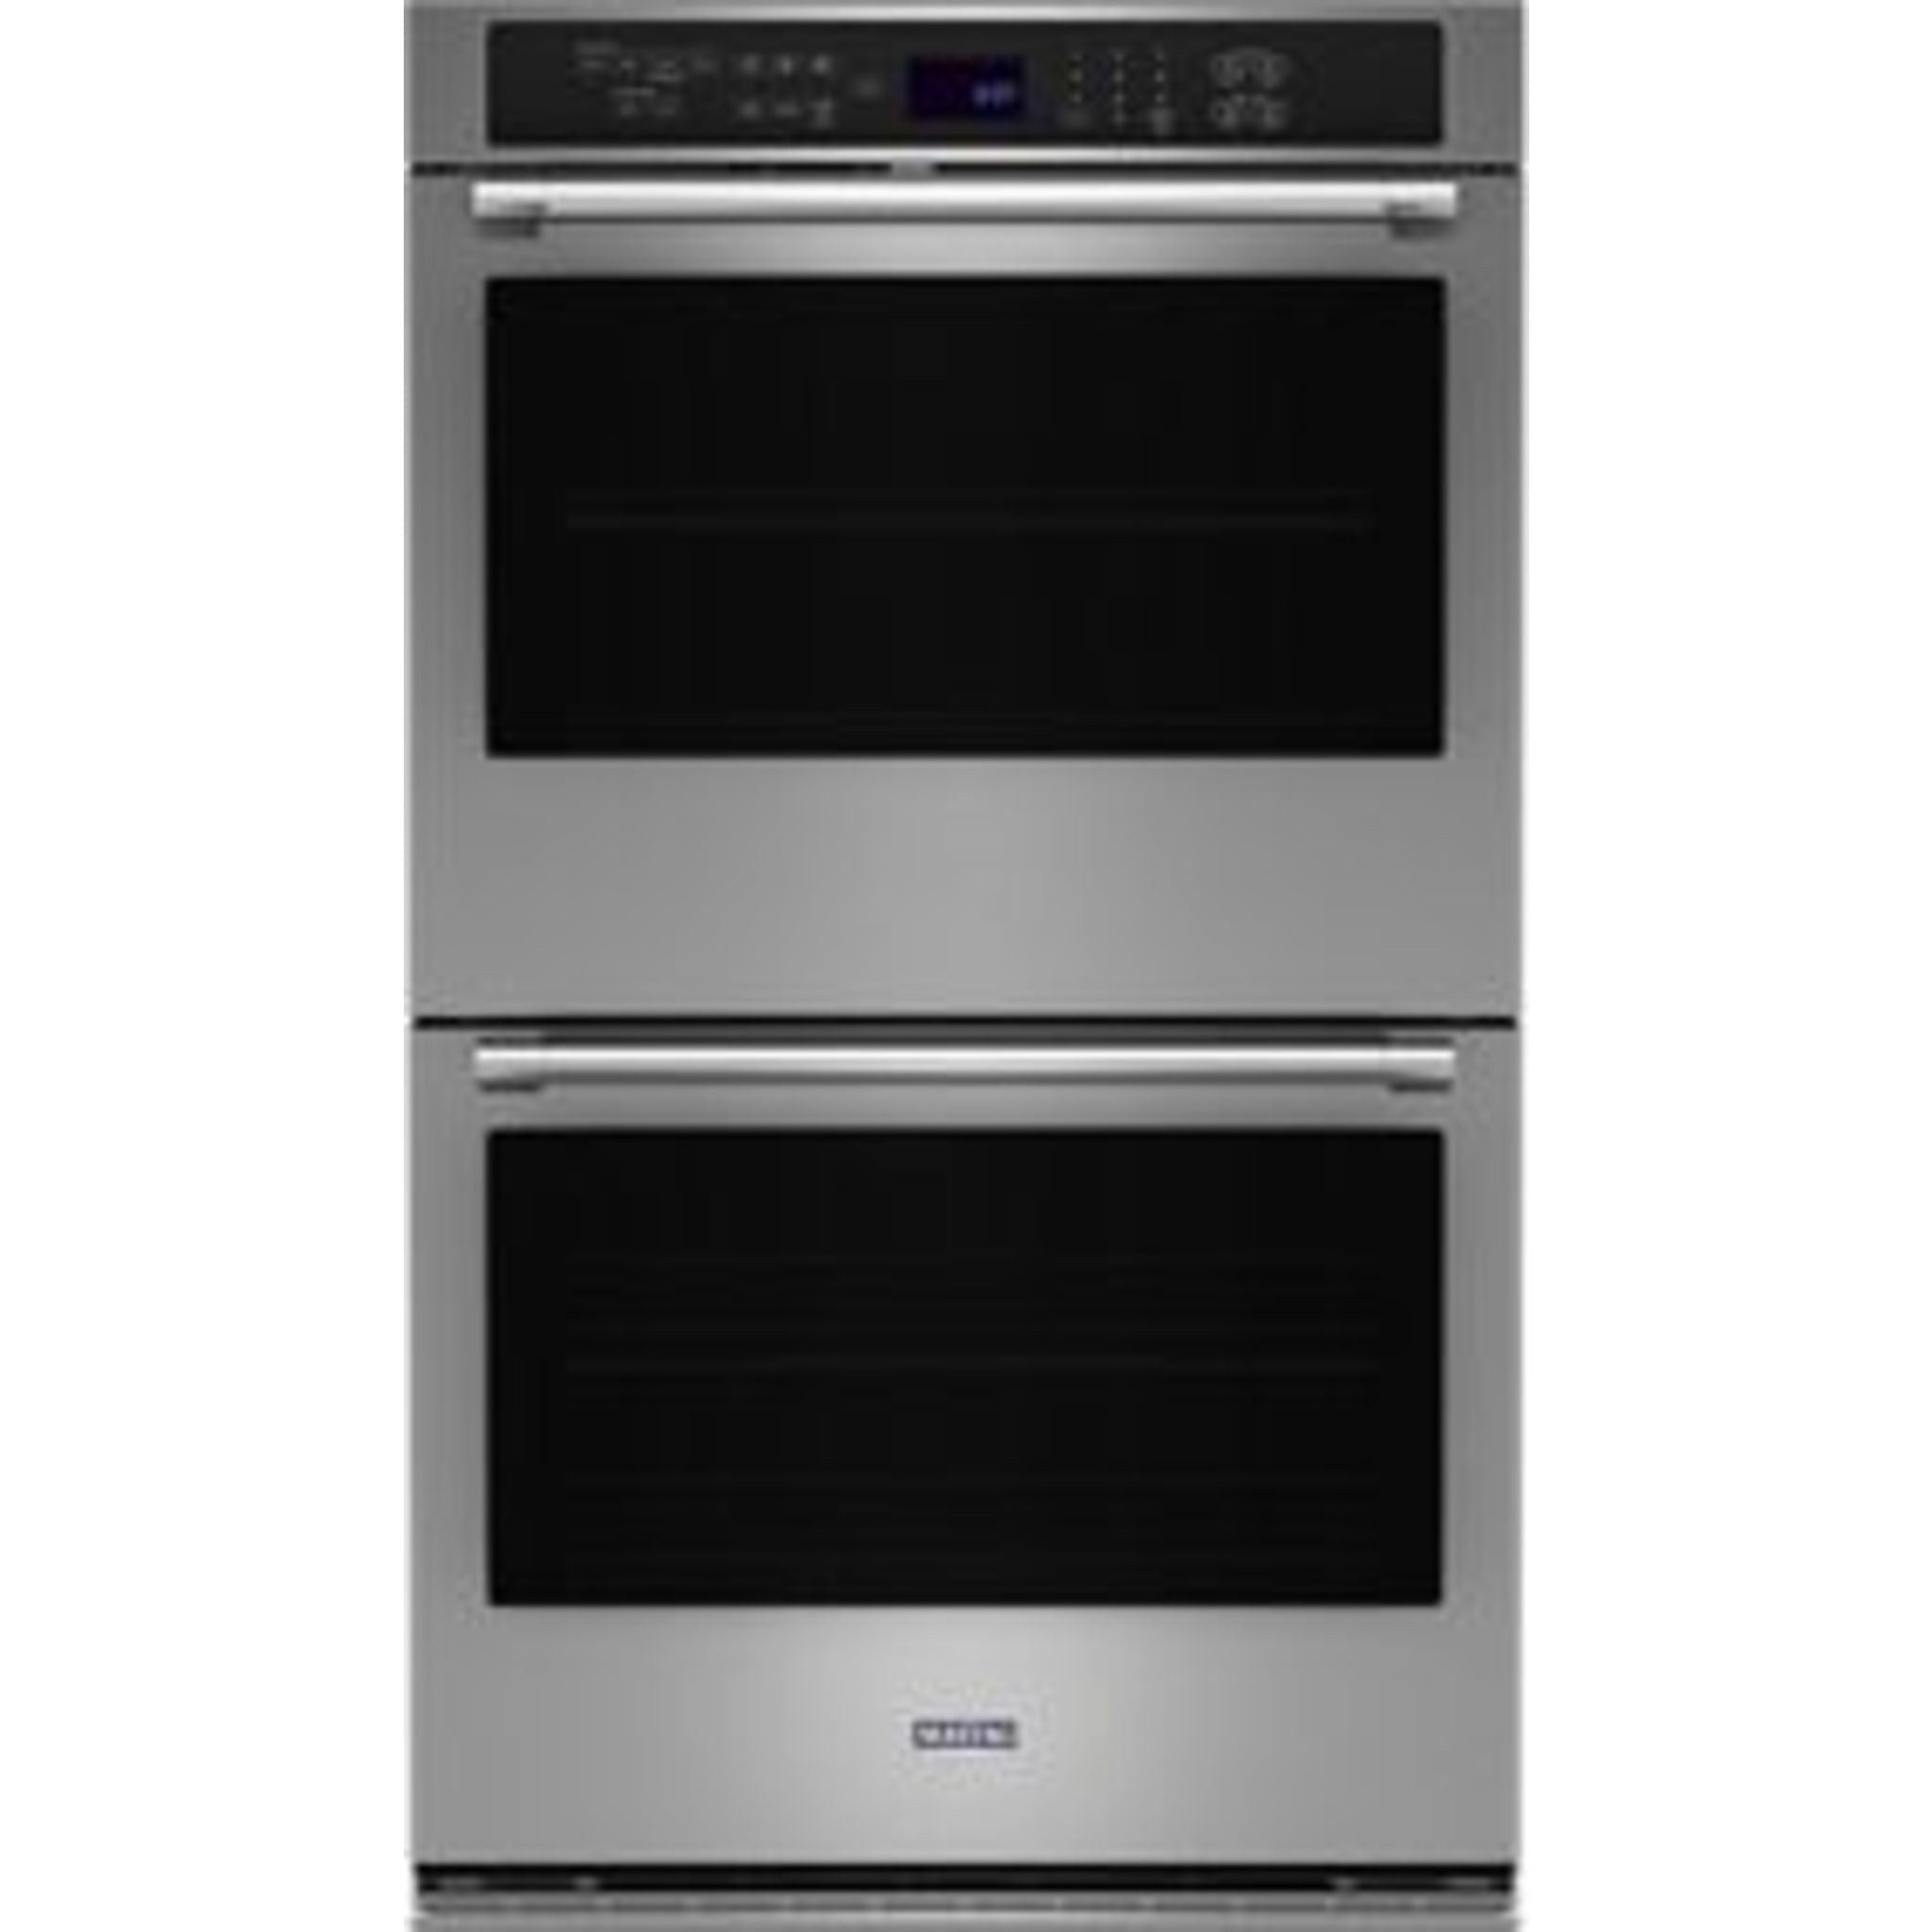 Maytag, Maytag 27" Convection Wall Oven (MOED6027LZ) - Fingerprint Resistant Stainless Steel